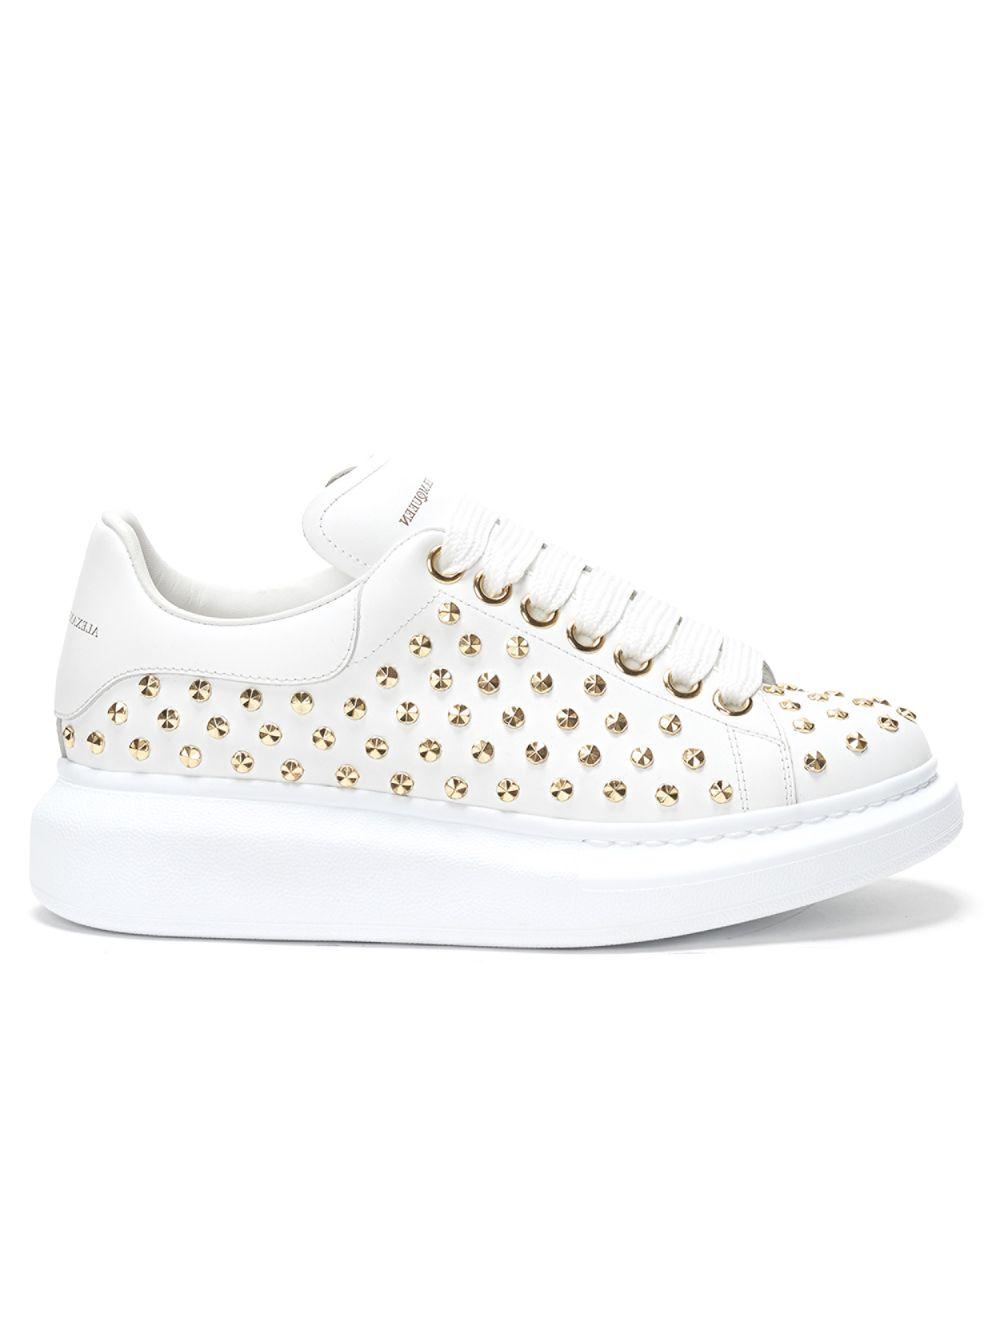 alexander mcqueen shoes with spikes 